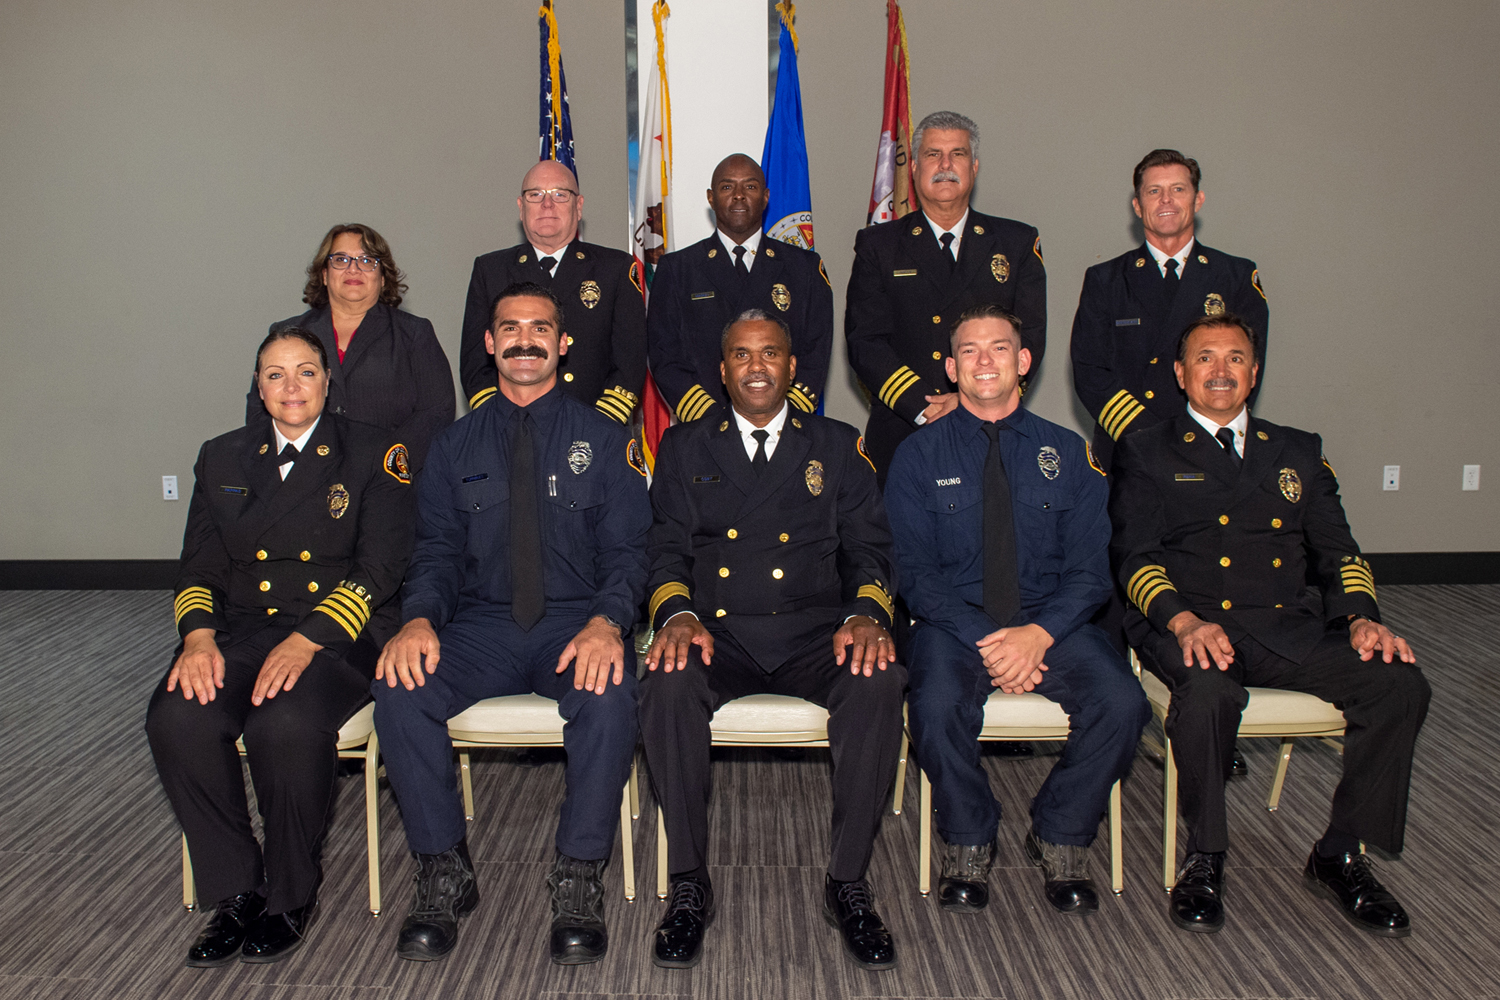 On Wednesday, July 20, 2022, the Los Angeles County Fire Department held a promotional ceremony, honoring 29 dedicated Departmental personnel at the MAYNE Events Center in Bellflower.